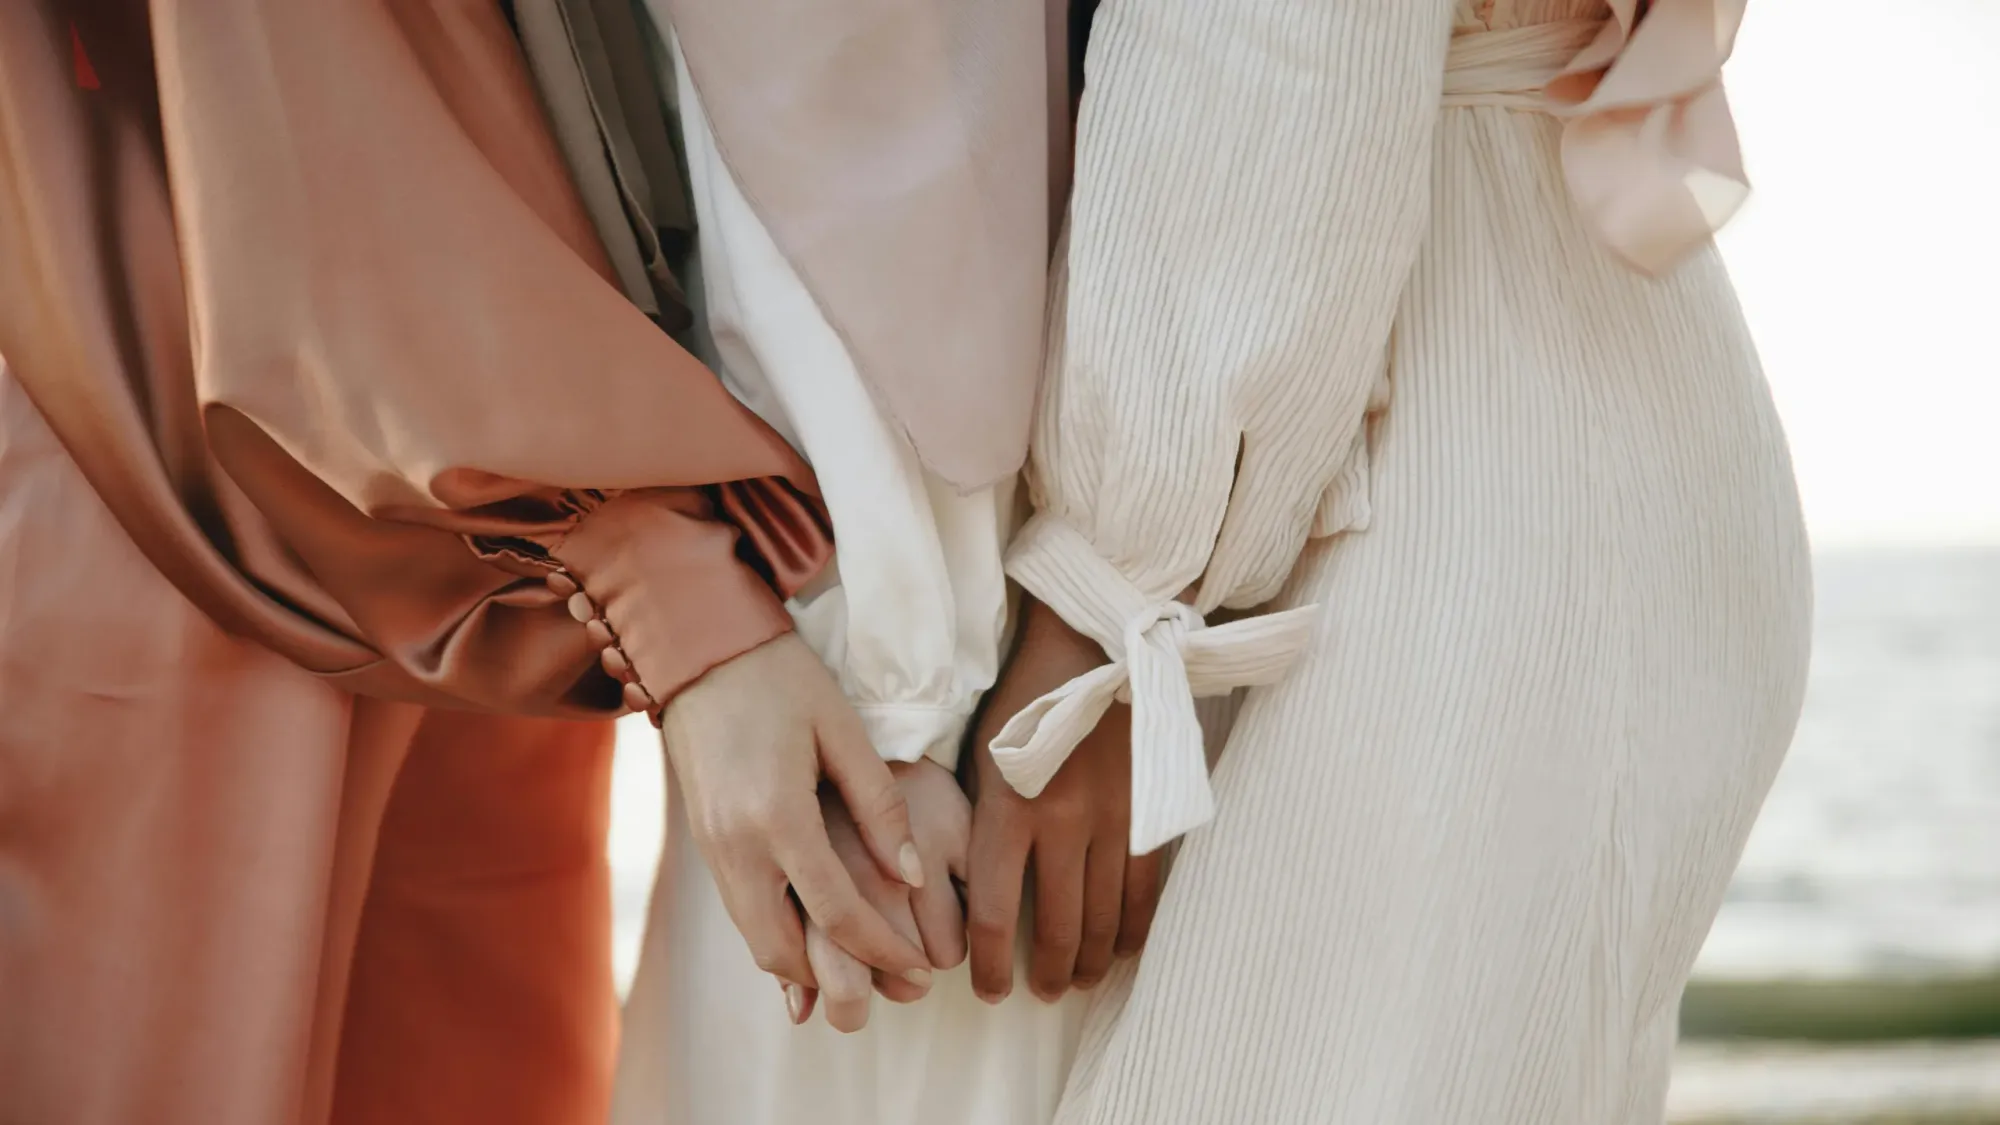 Women wearing dresses of different textures and holding hands.